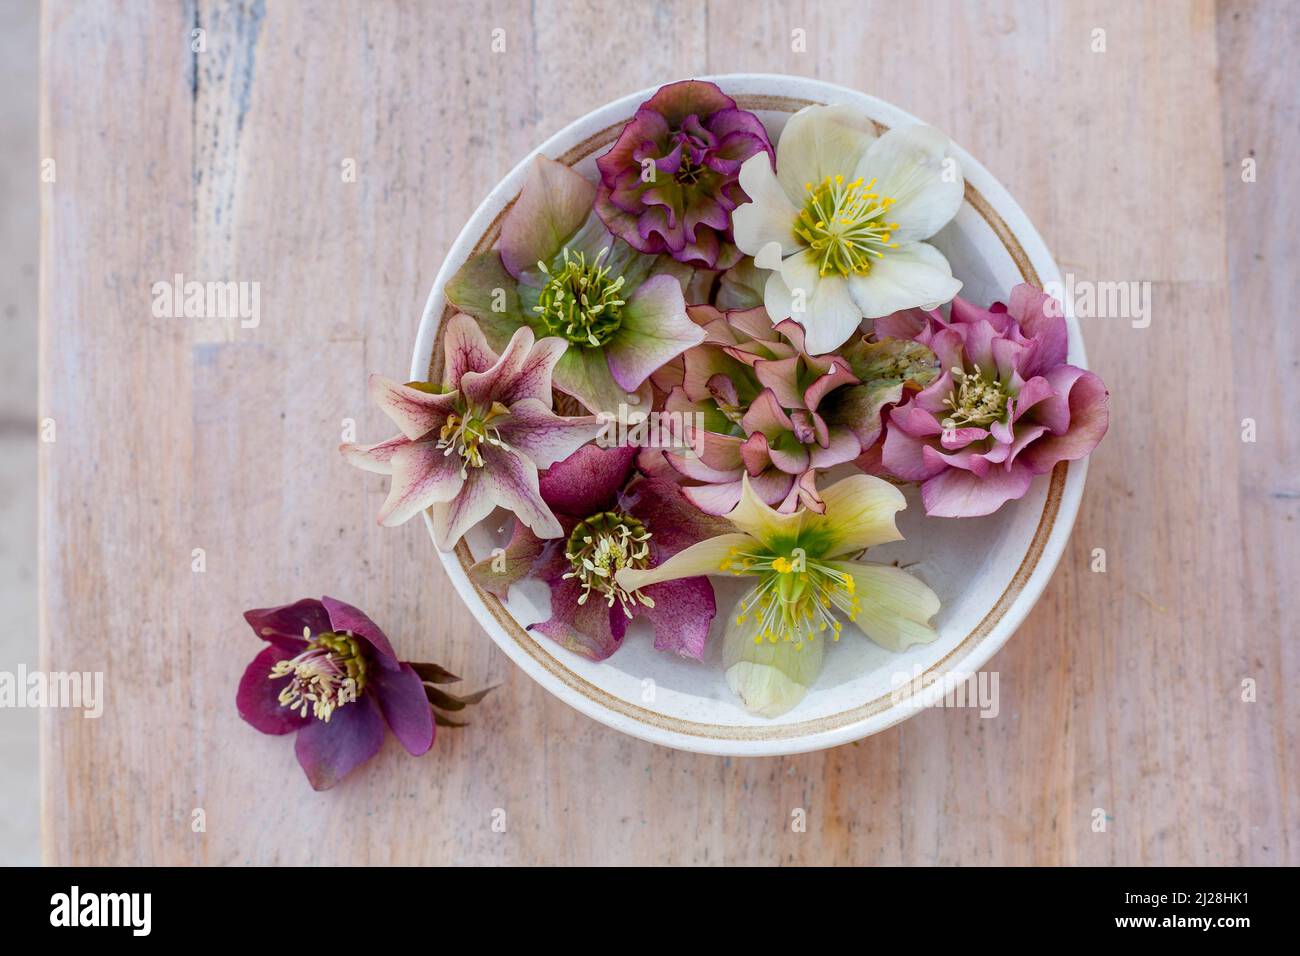 a ceramic bowl with beautiful variete of pink and white hellebore on wooden table Stock Photo